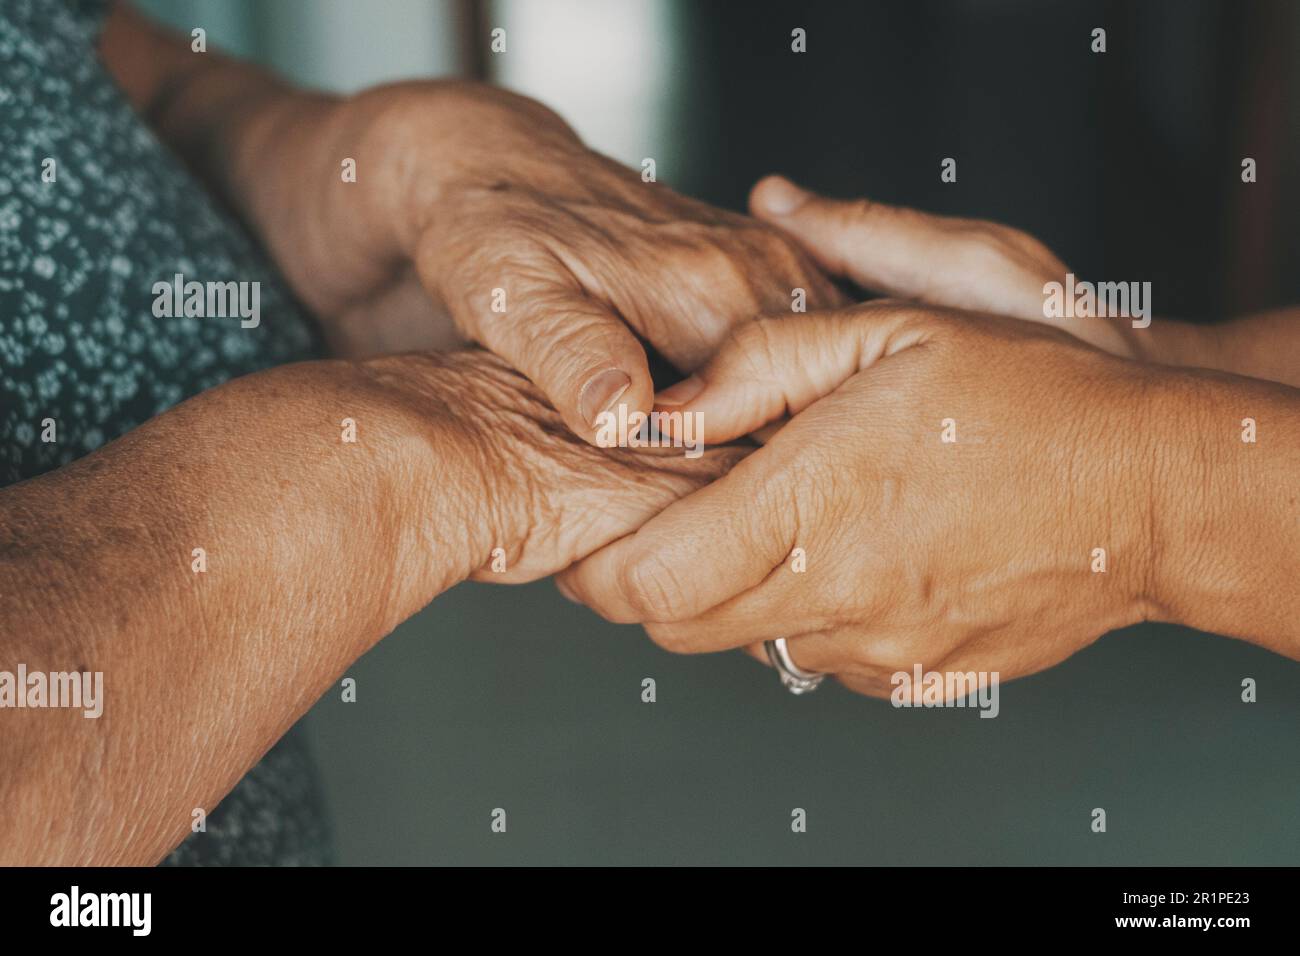 senior, woman, hands, hold, detail, concept, care, help, support Stock Photo